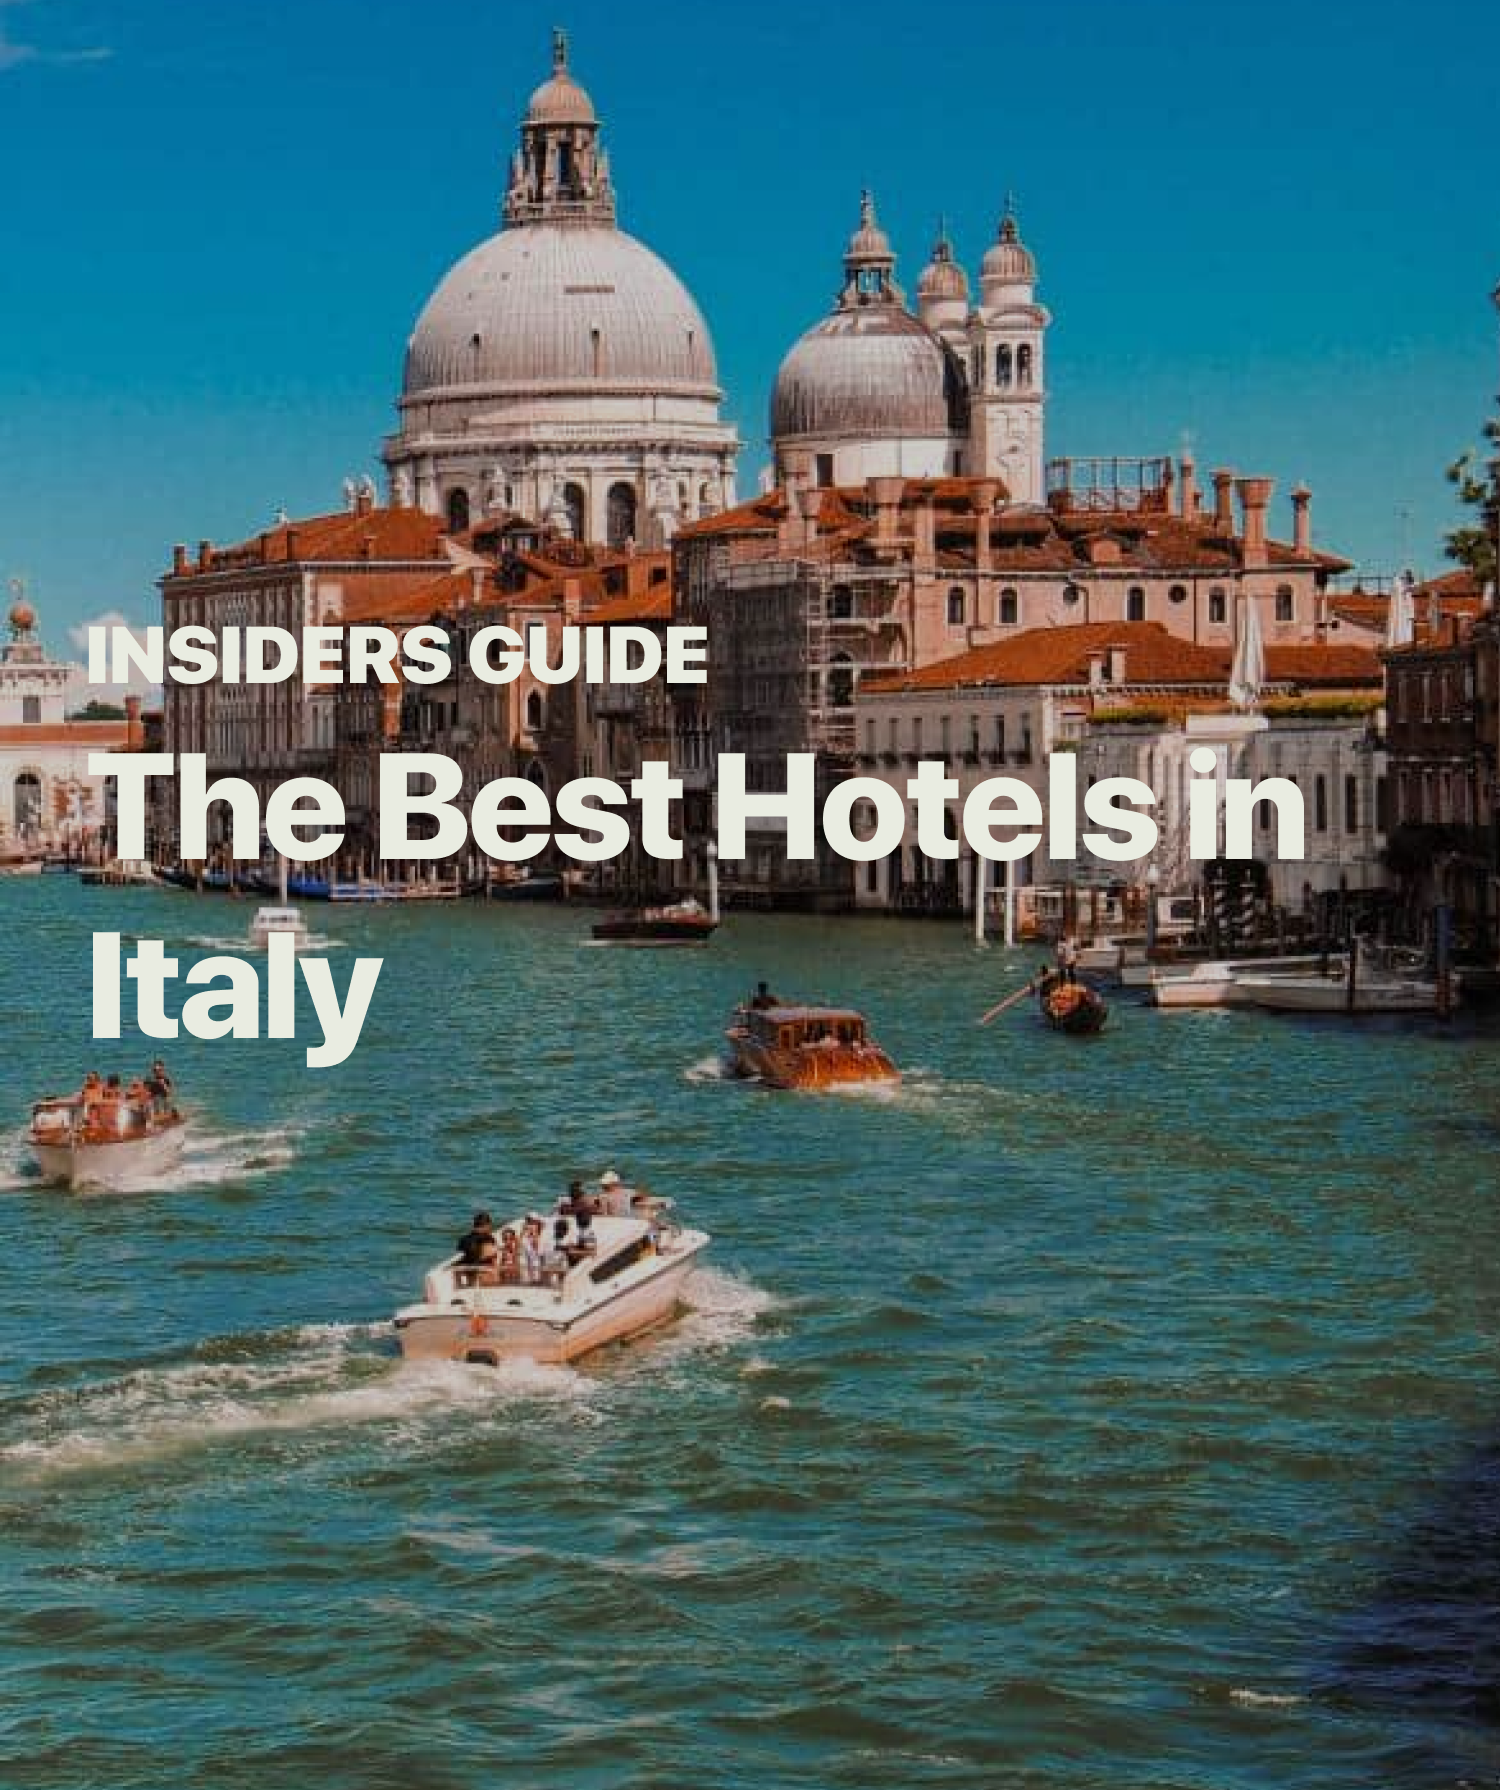 The Best Hotels in Italy